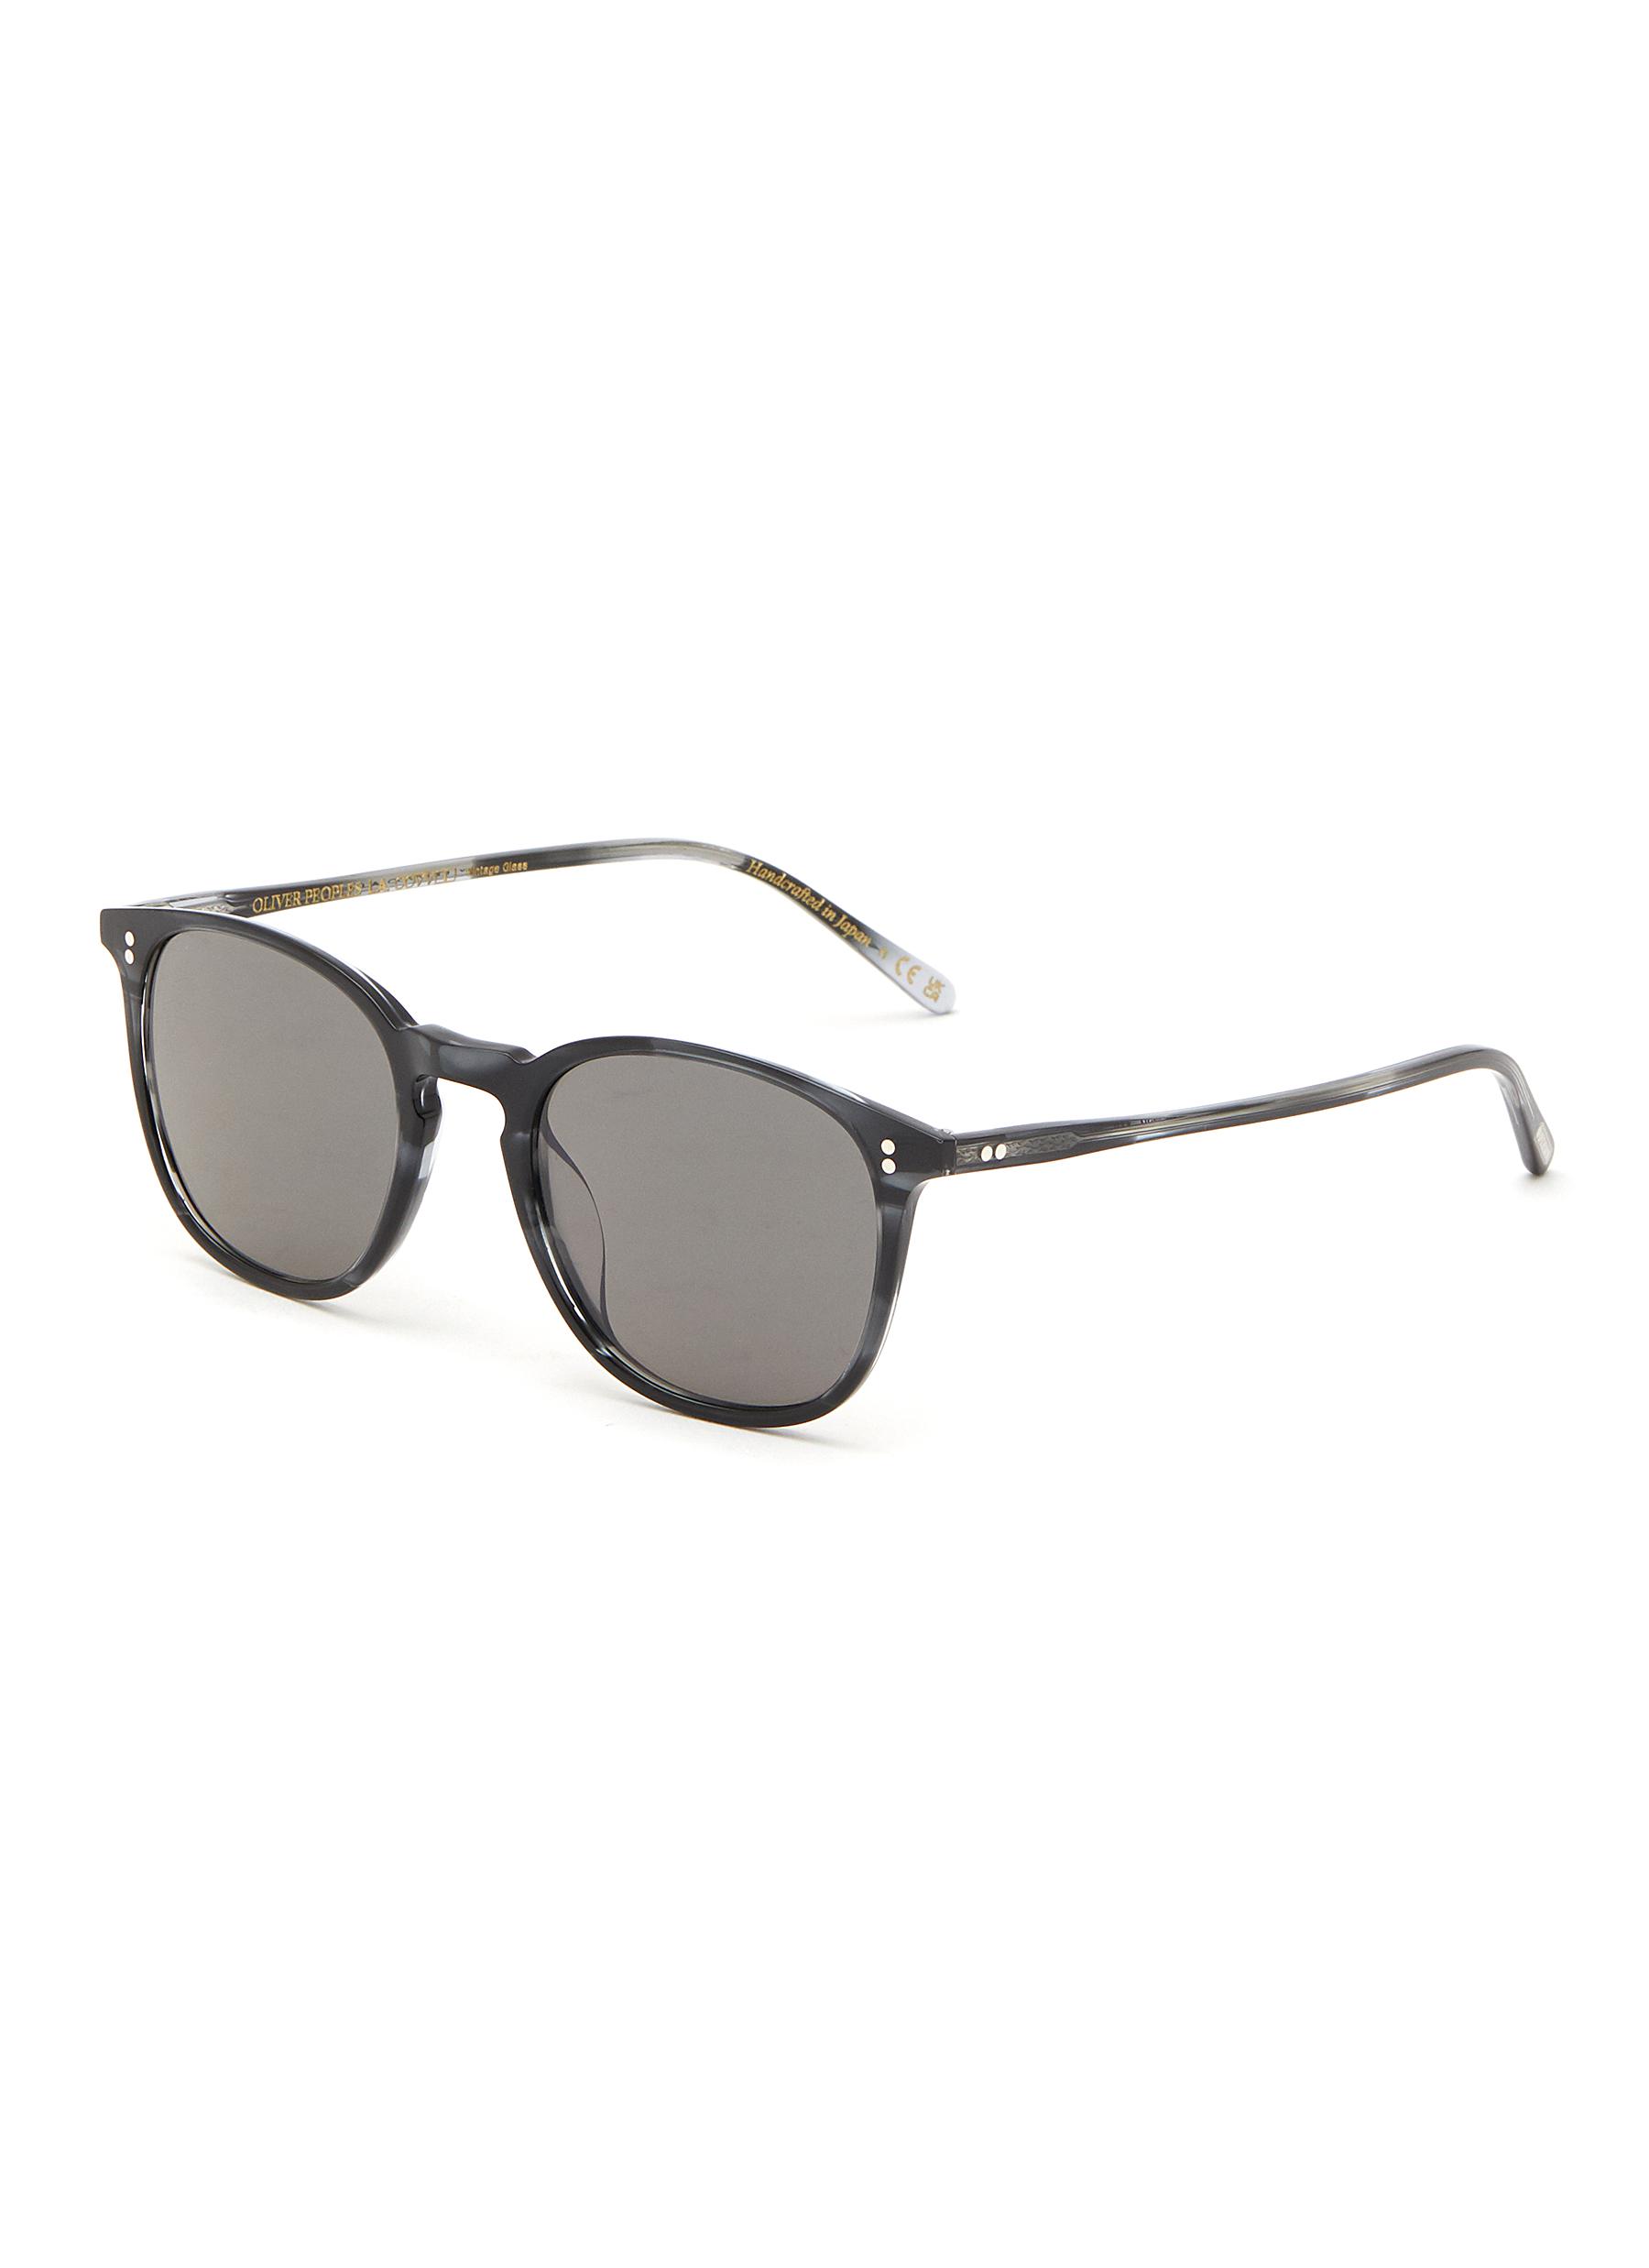 OLIVER PEOPLES ACCESSORIES GREY LENS ROUND ACETATE FRAME SUNGLASSES